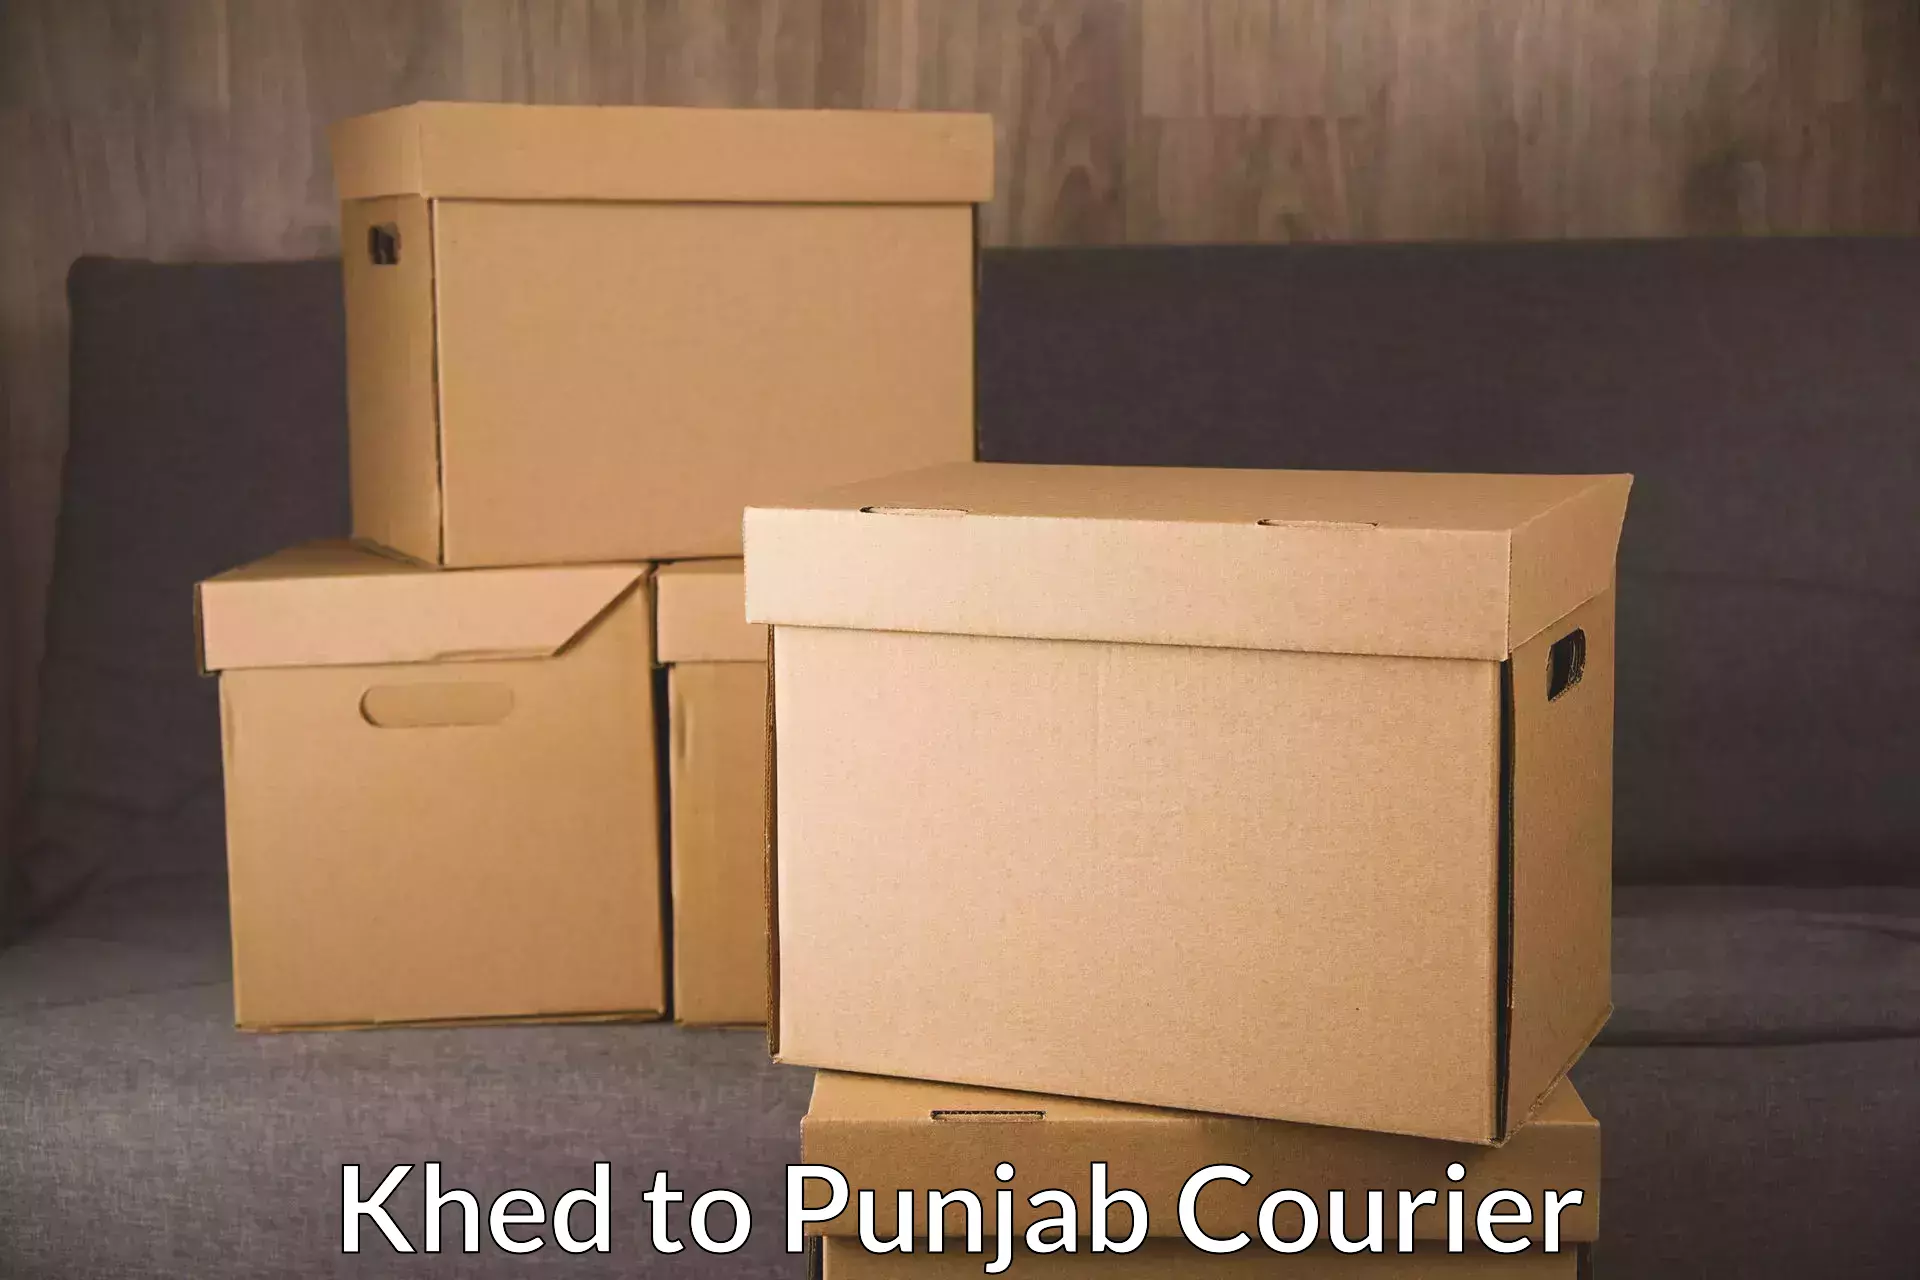 Efficient order fulfillment in Khed to Bhadaur